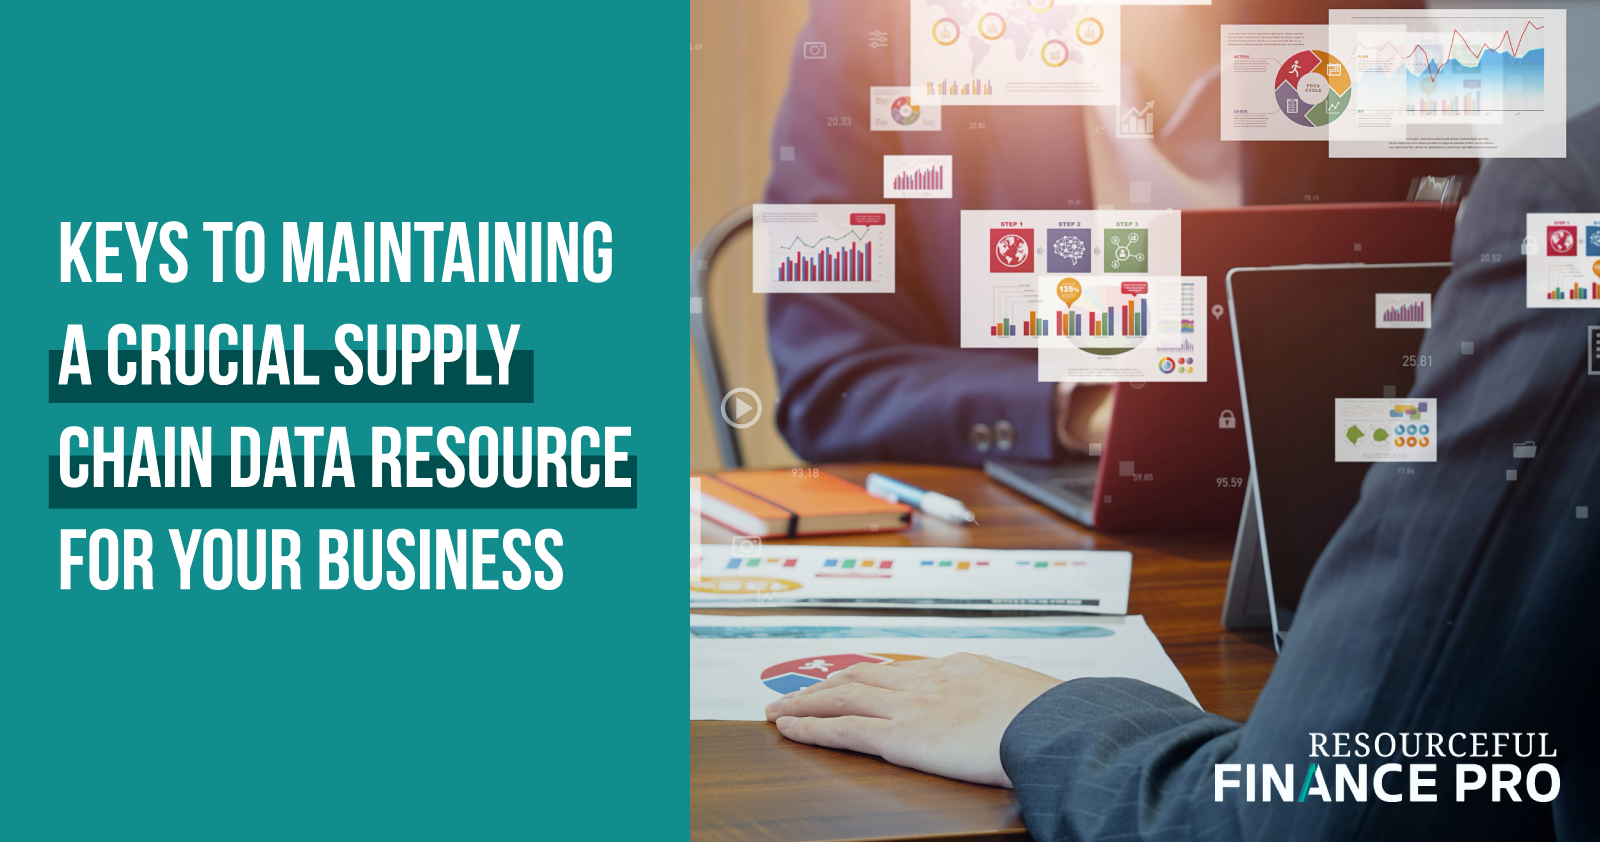 Keys To Maintaining A Crucial Supply Chain Data Resource For Your Business